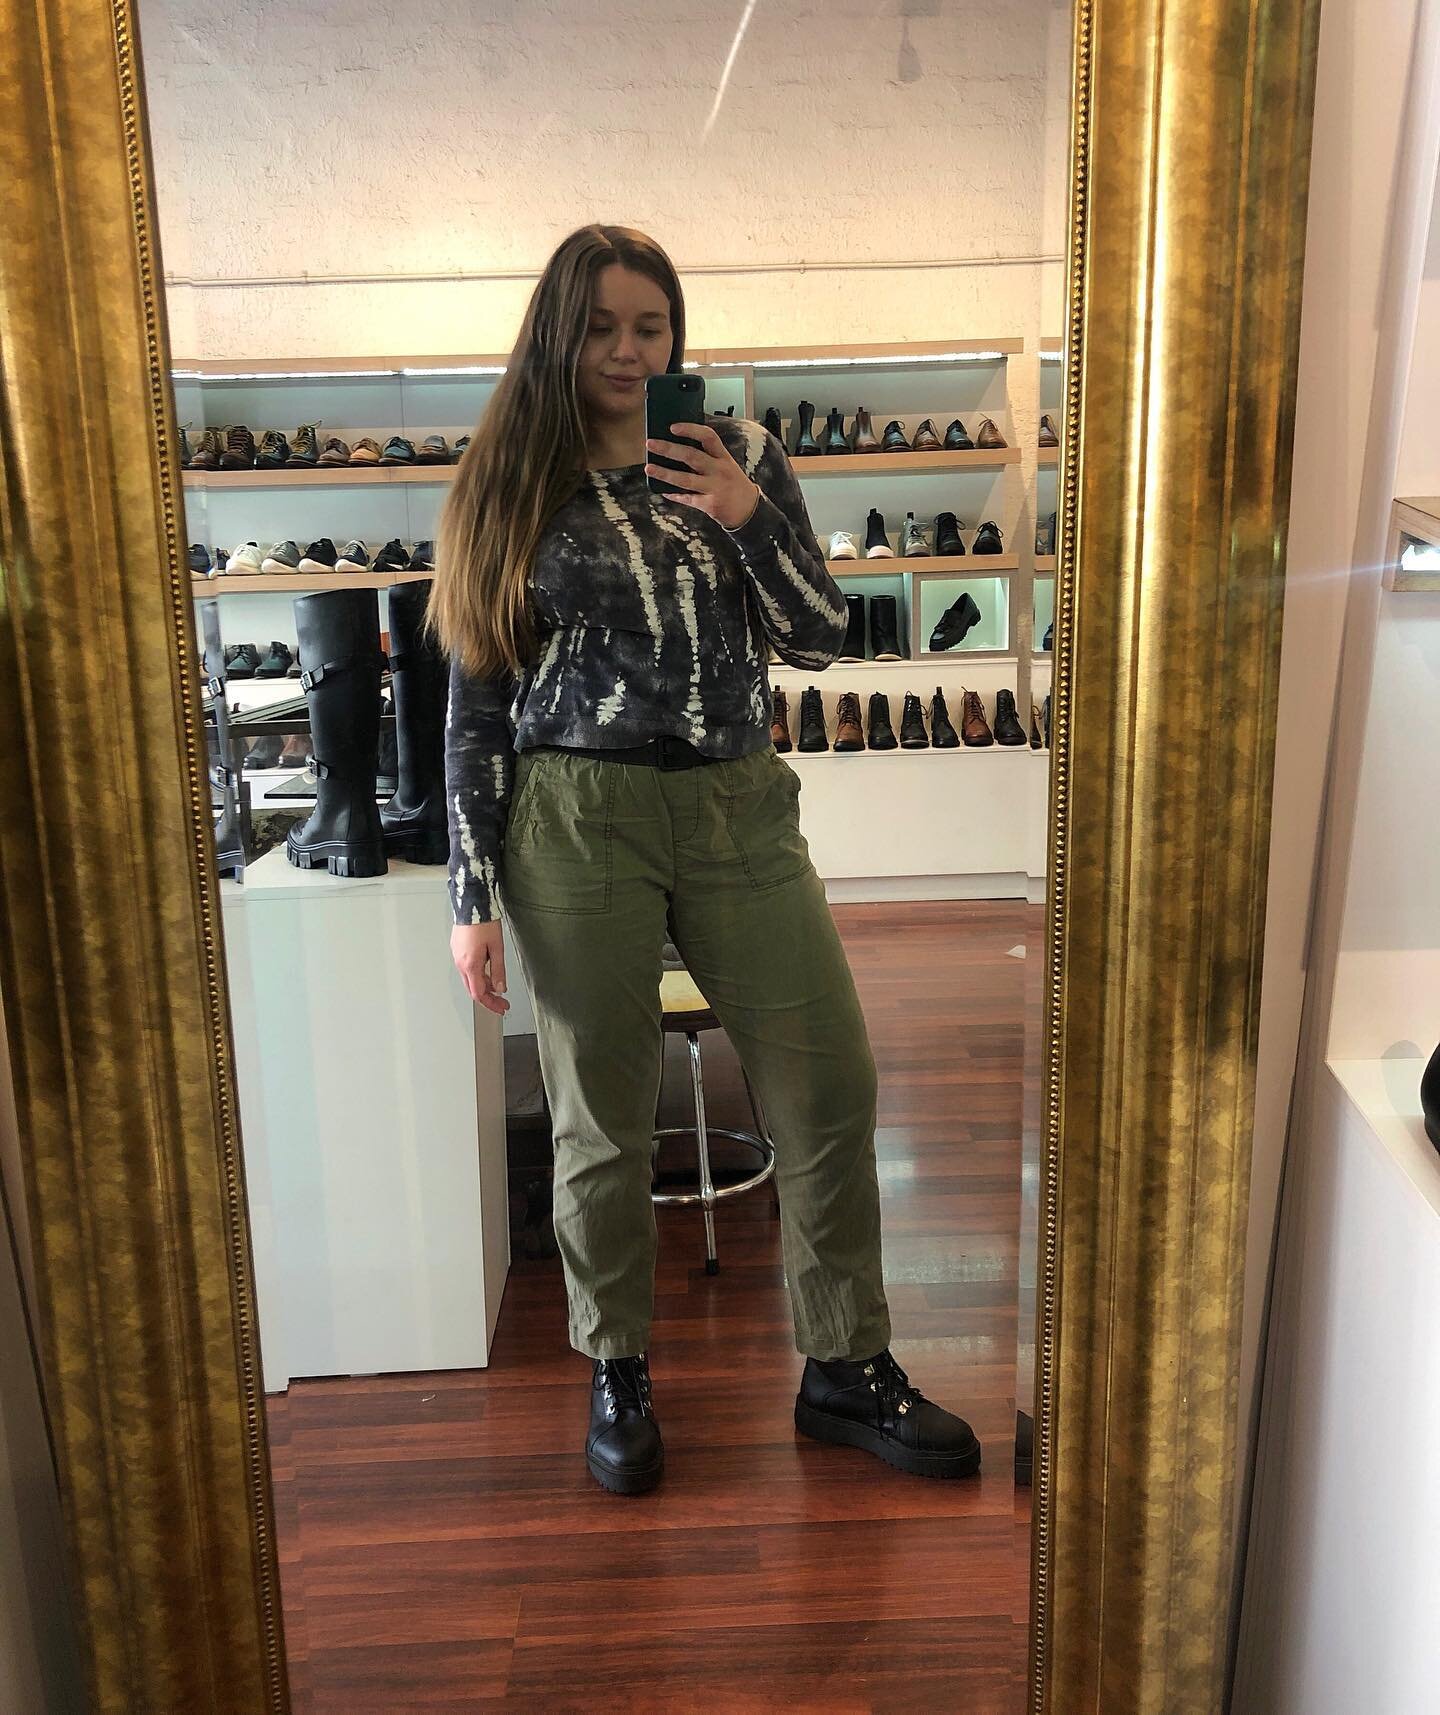 VS team member Maddie shares a peek of her new belt, Conor in matte black from our latest collection. It completes her outfit, along with our Gen boots in black that she&rsquo;s worn regularly for 2 years now (and still look new!) 

Head to @vegansty